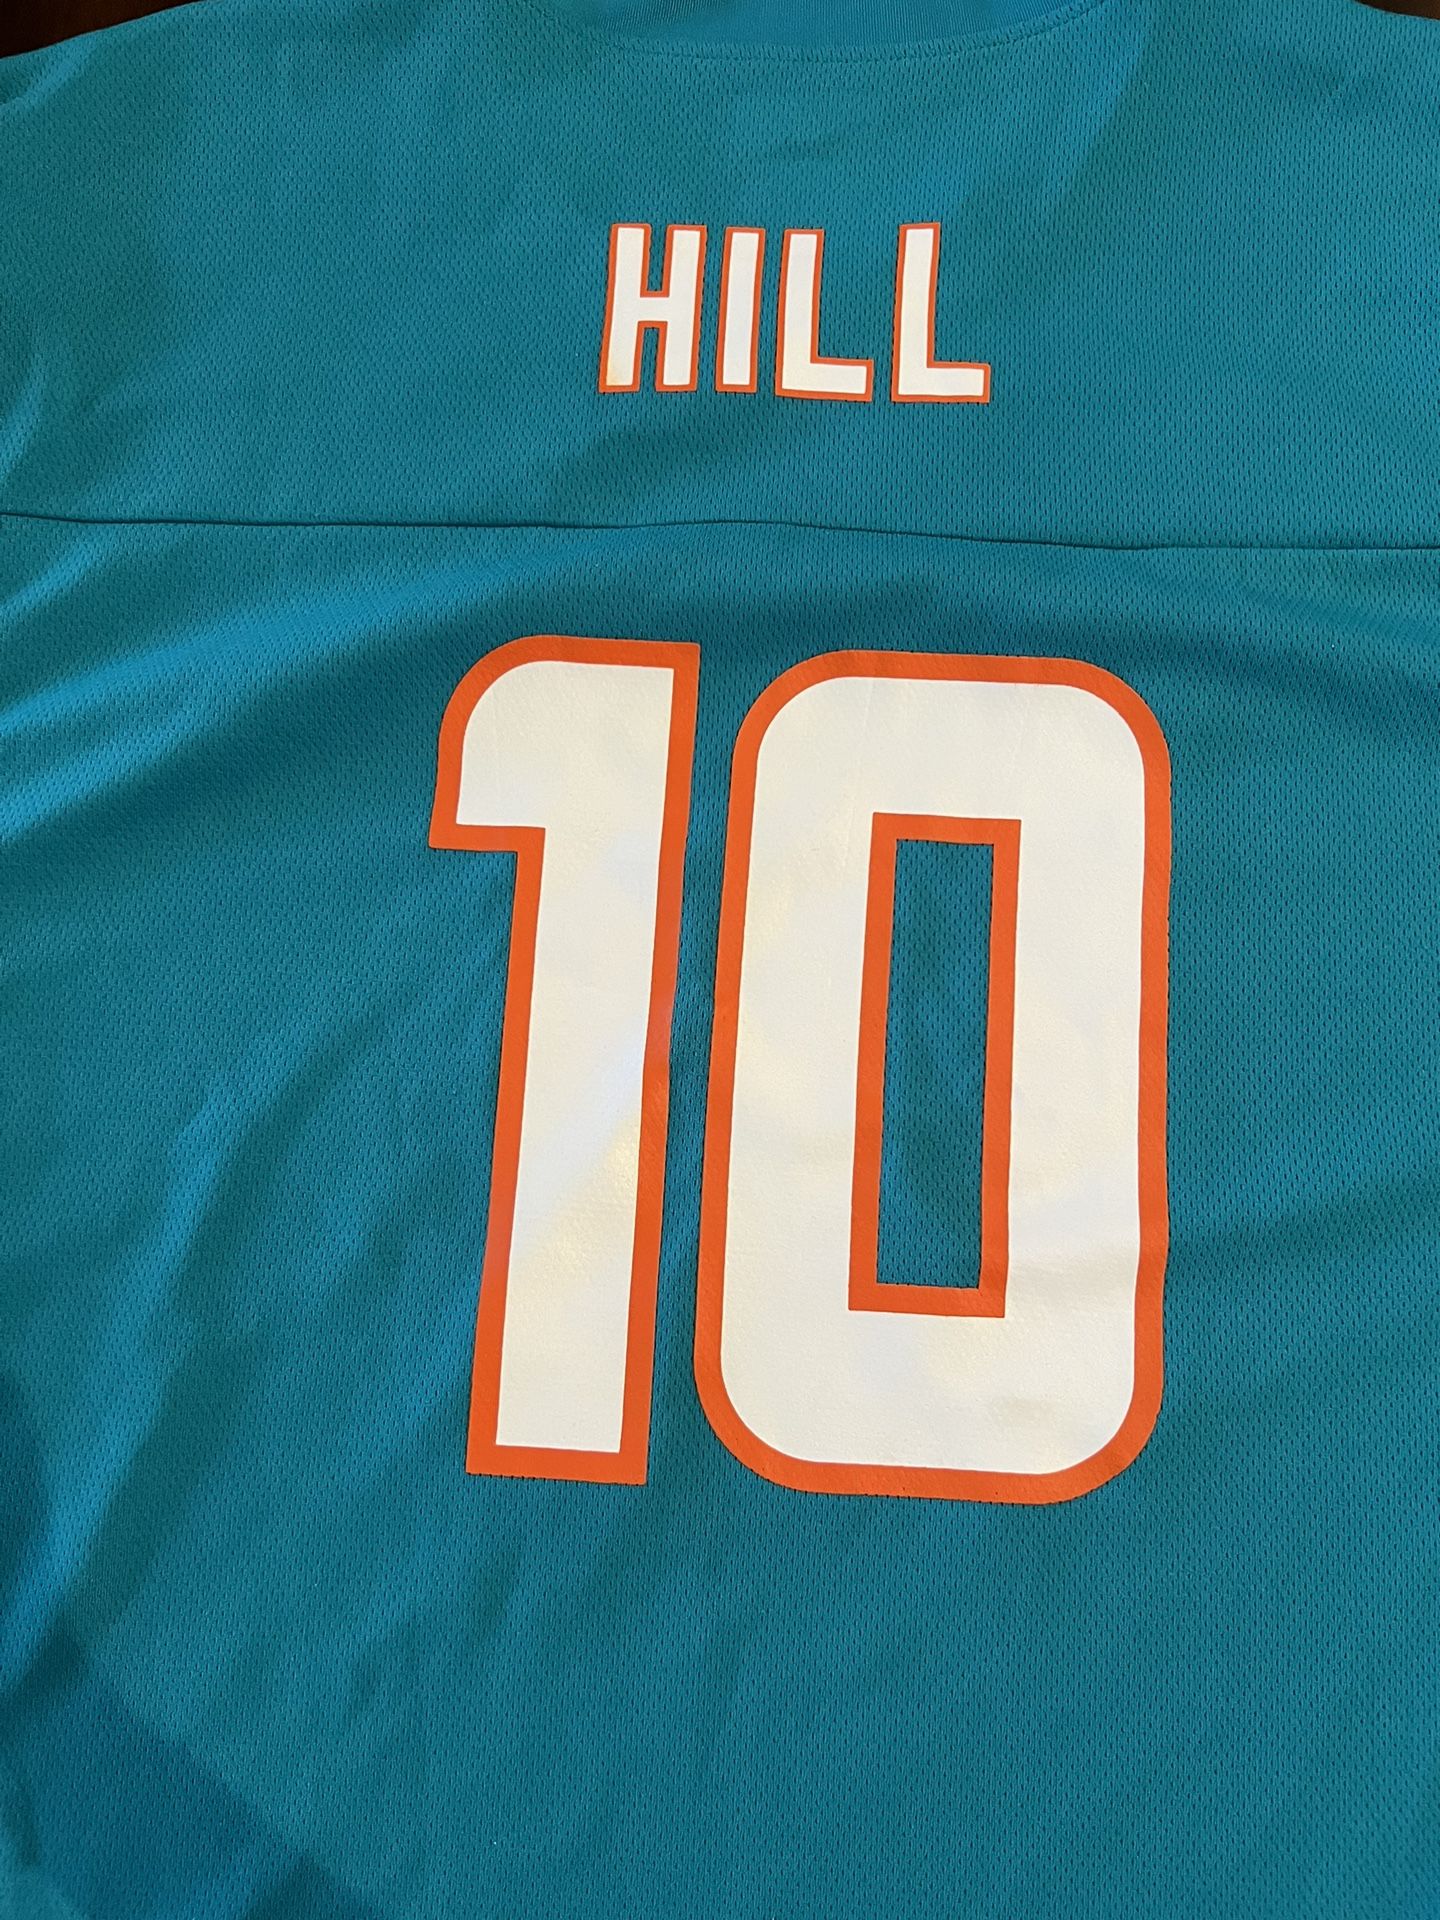 NFL Dolphins Jersey - Hill